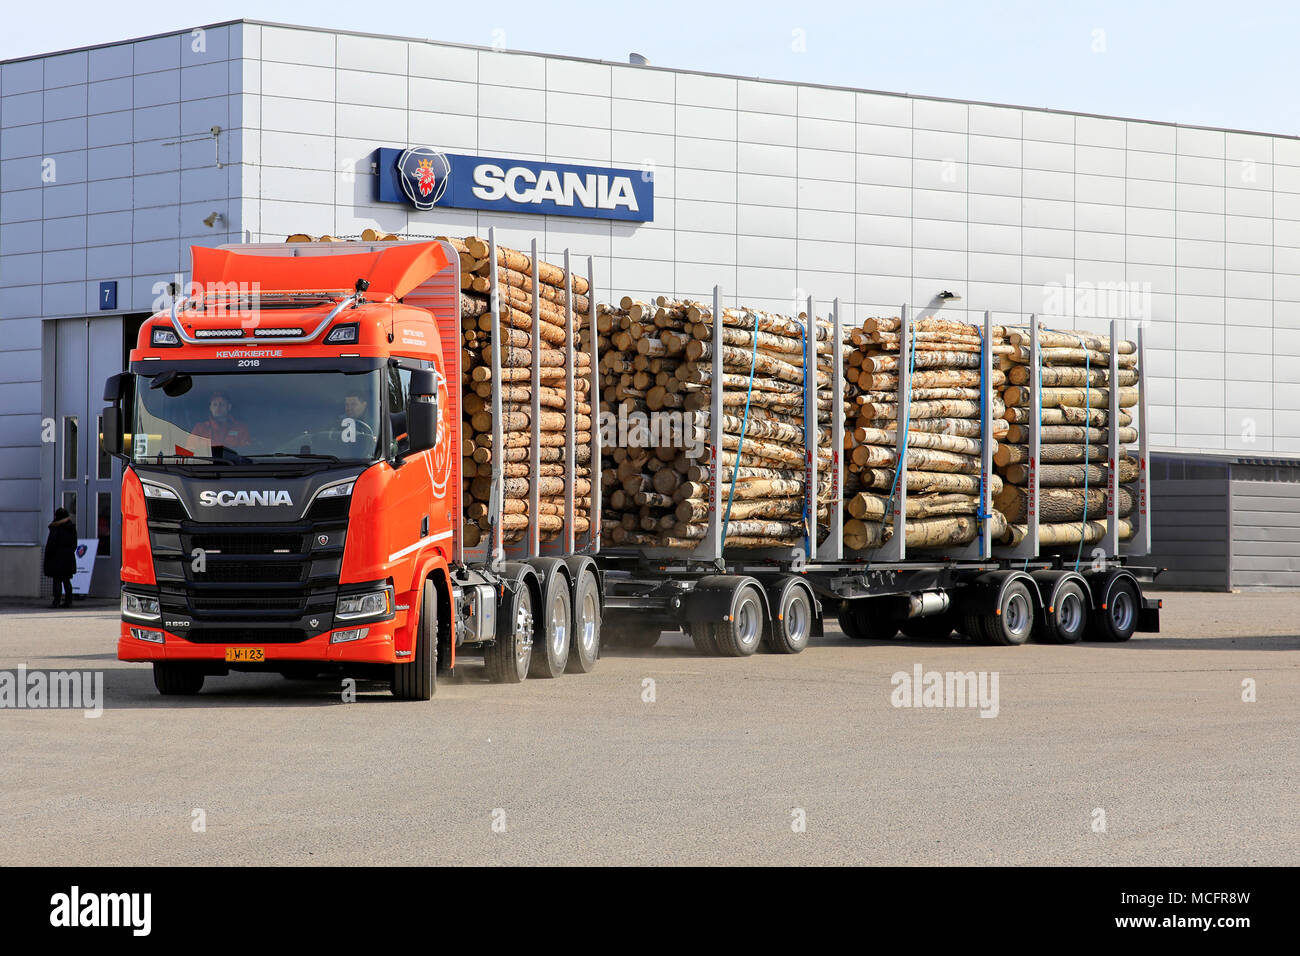 LIETO, FINLAND - APRIL 12, 2018: Orange Scania R650 logging truck at Scania dealer for test drive during Scania Tour 2018 in Turku. Stock Photo